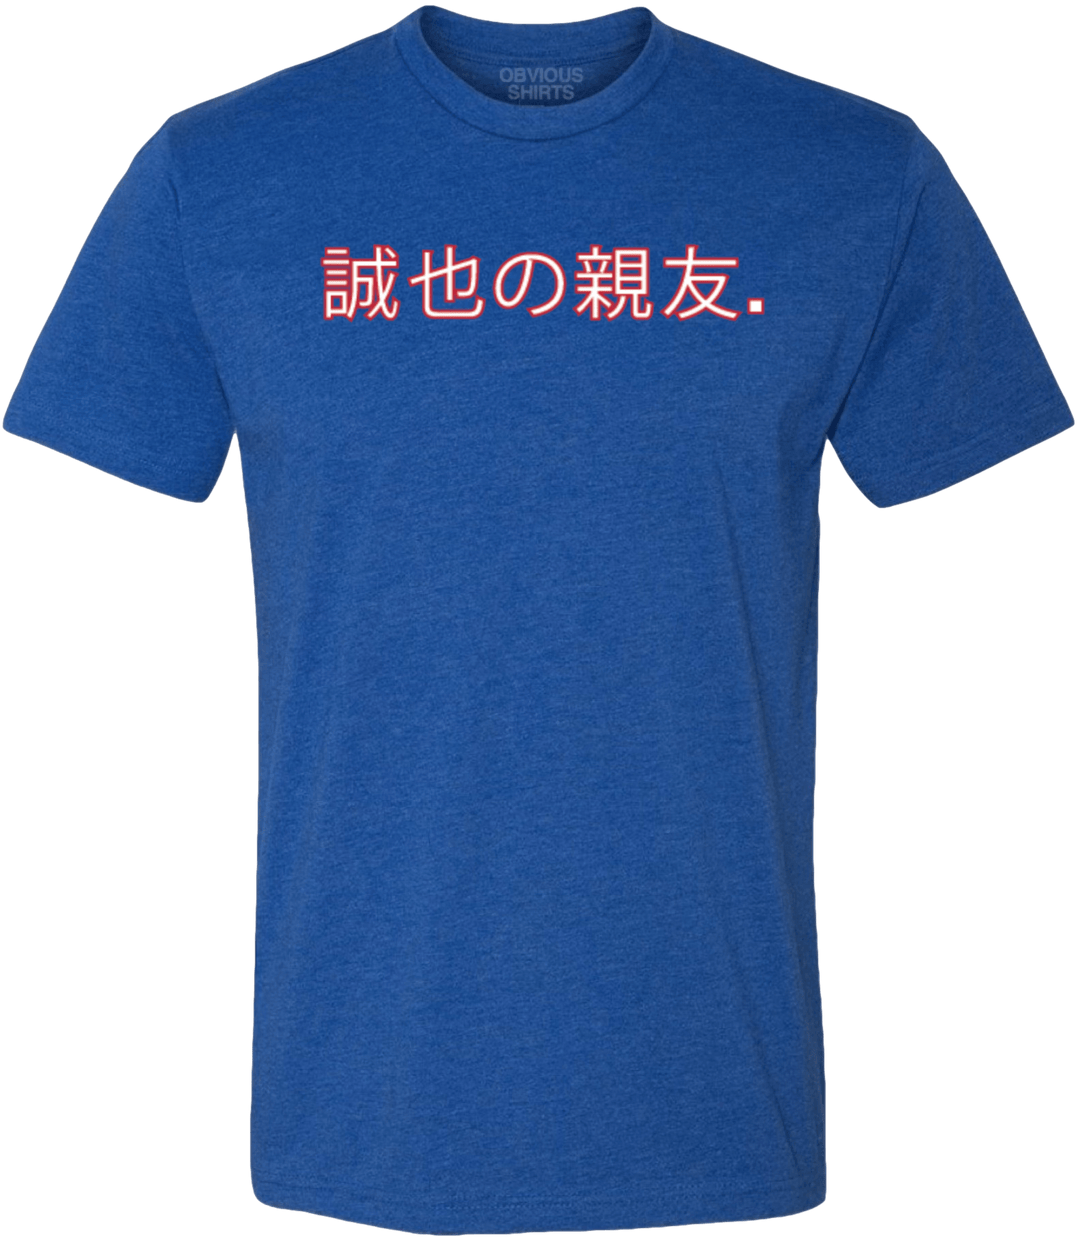 SEIYA'S BEST FRIEND (IN JAPANESE) - OBVIOUS SHIRTS.